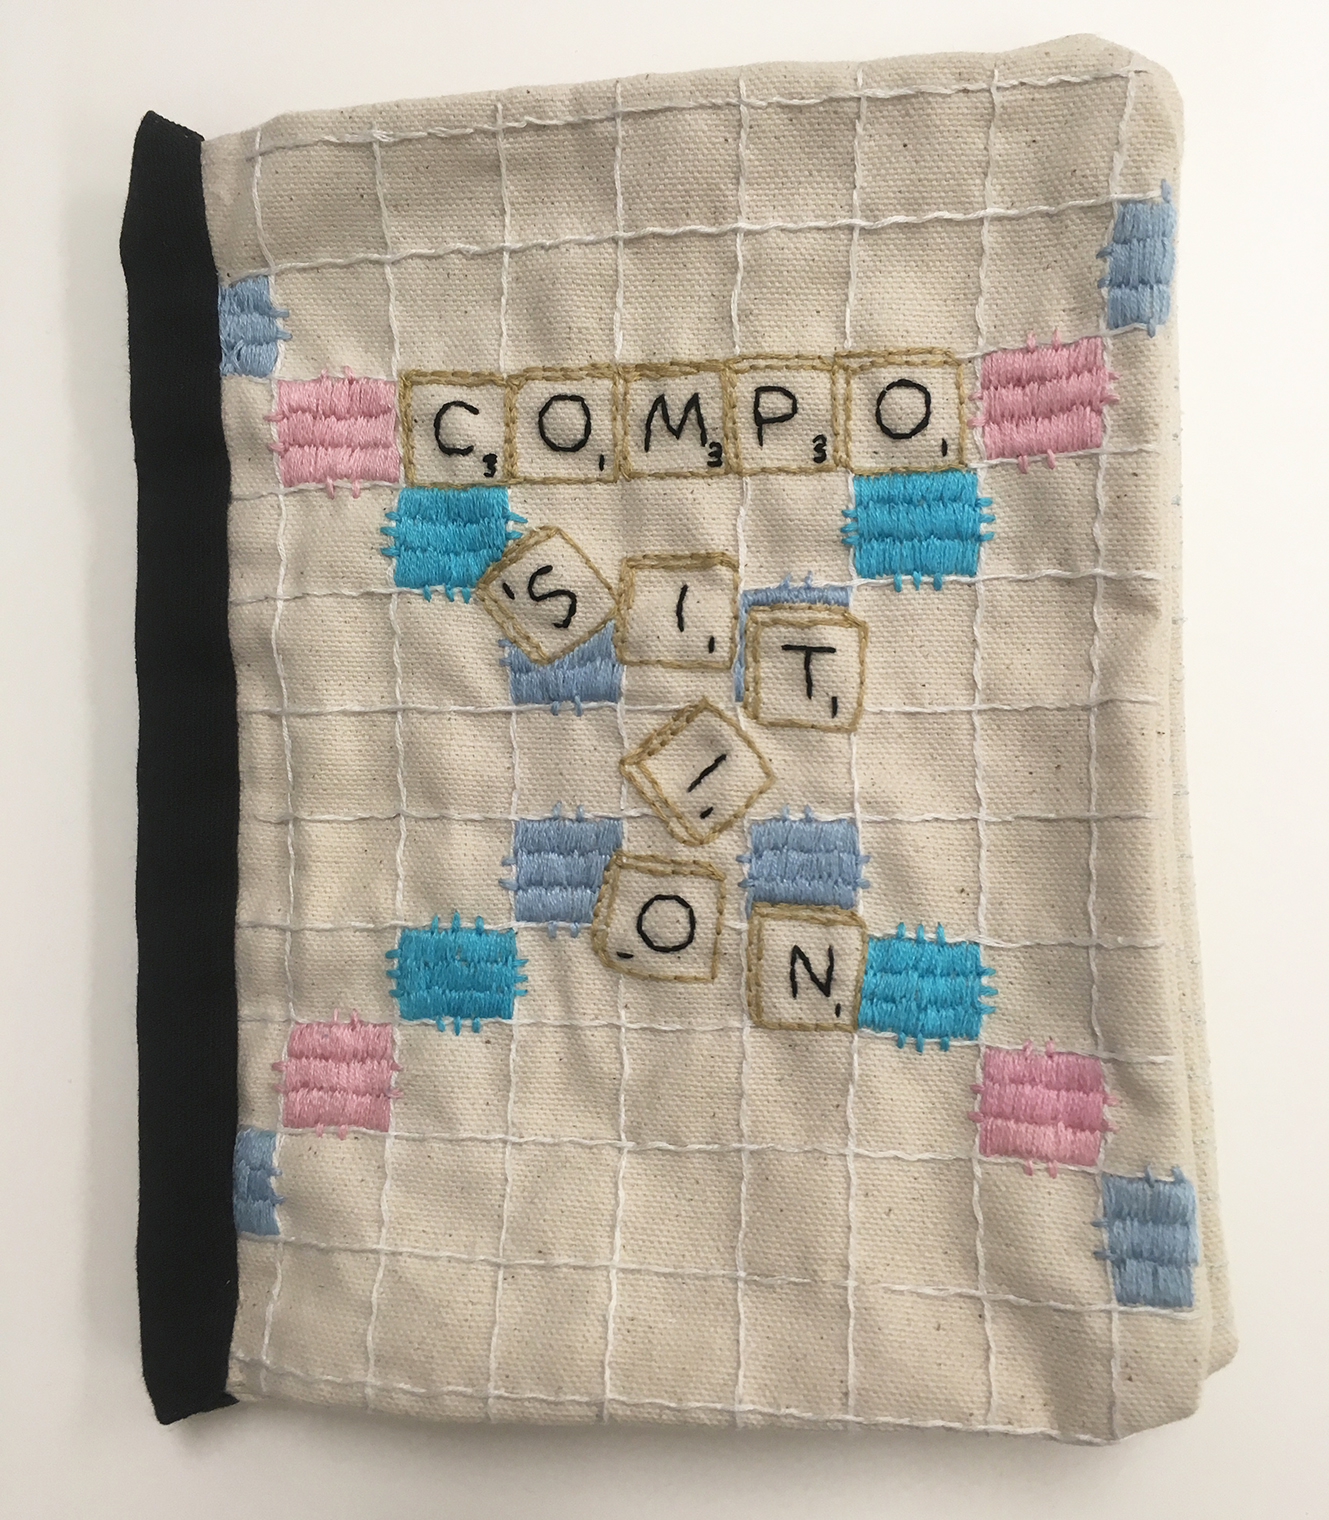 Embroidered composition notebook entitled "Common Threads" by Candace Hicks